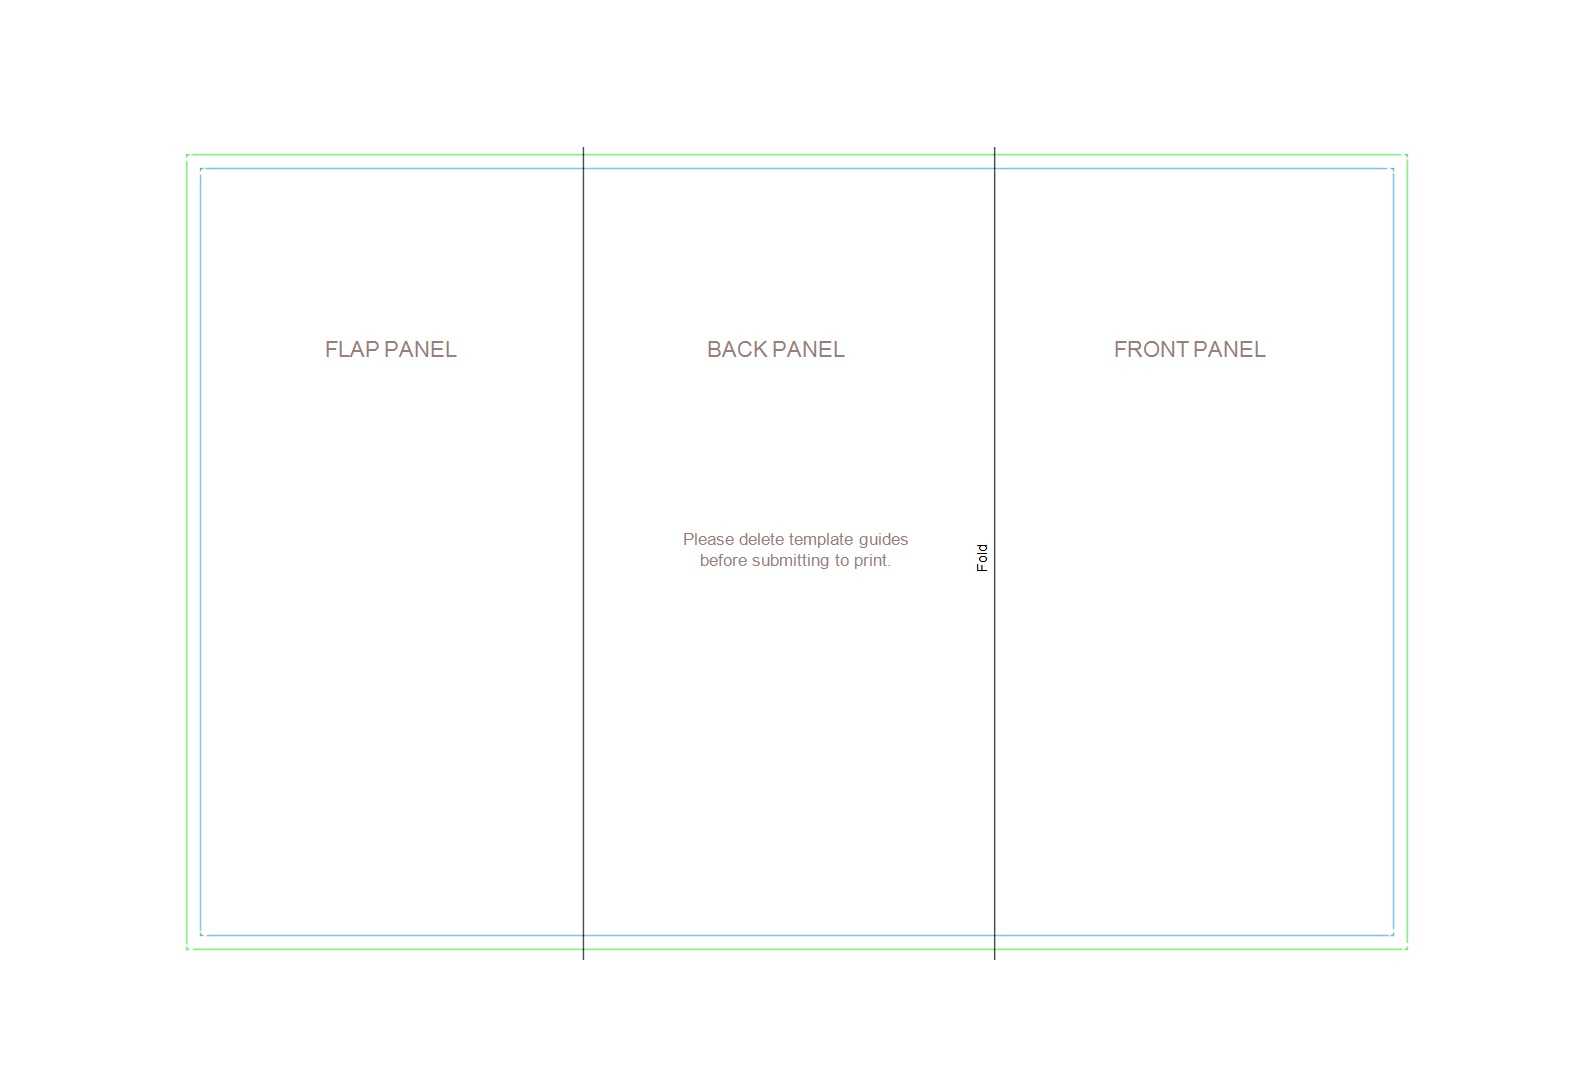 50 Free Pamphlet Templates [Word / Google Docs] ᐅ Template Lab For Google Drive Brochure Templates